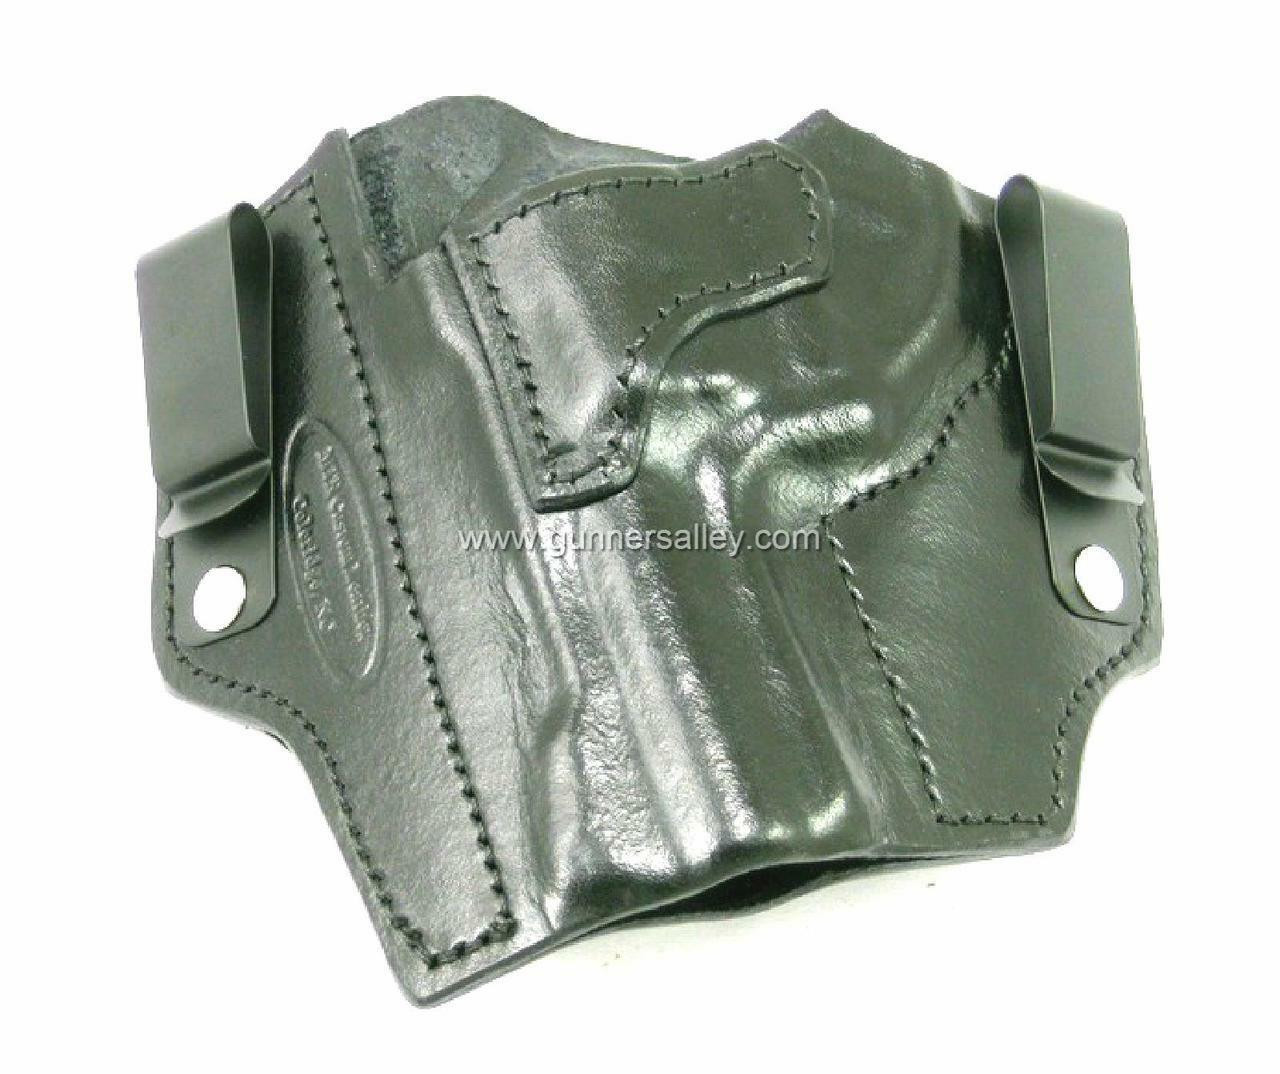 LH Black MTR Slimline Tuckable IWB Holster for a Ruger LCRX 3" - Front view